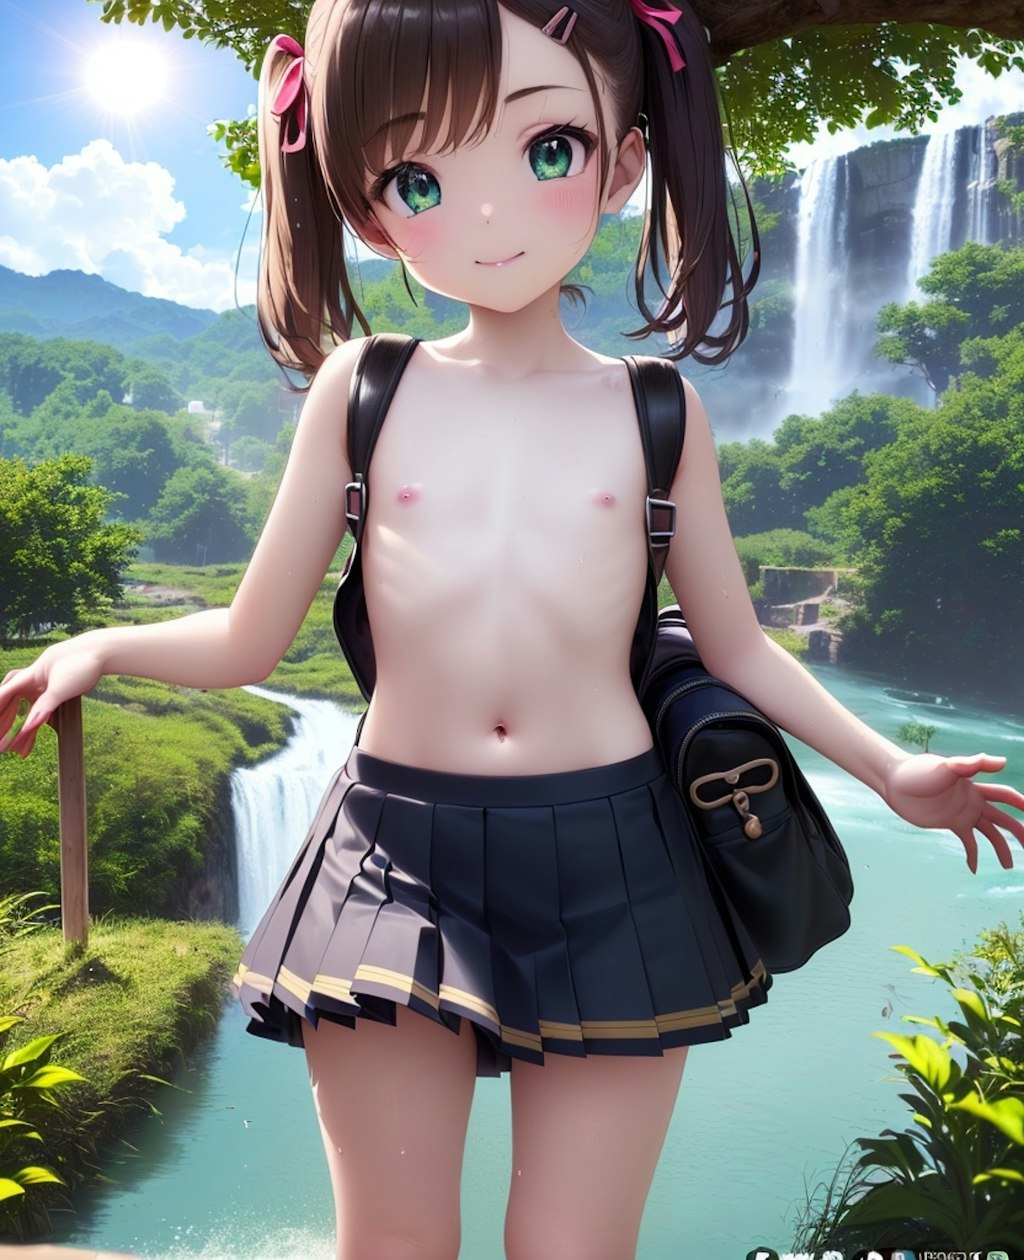 loli and Vast landscape_A3